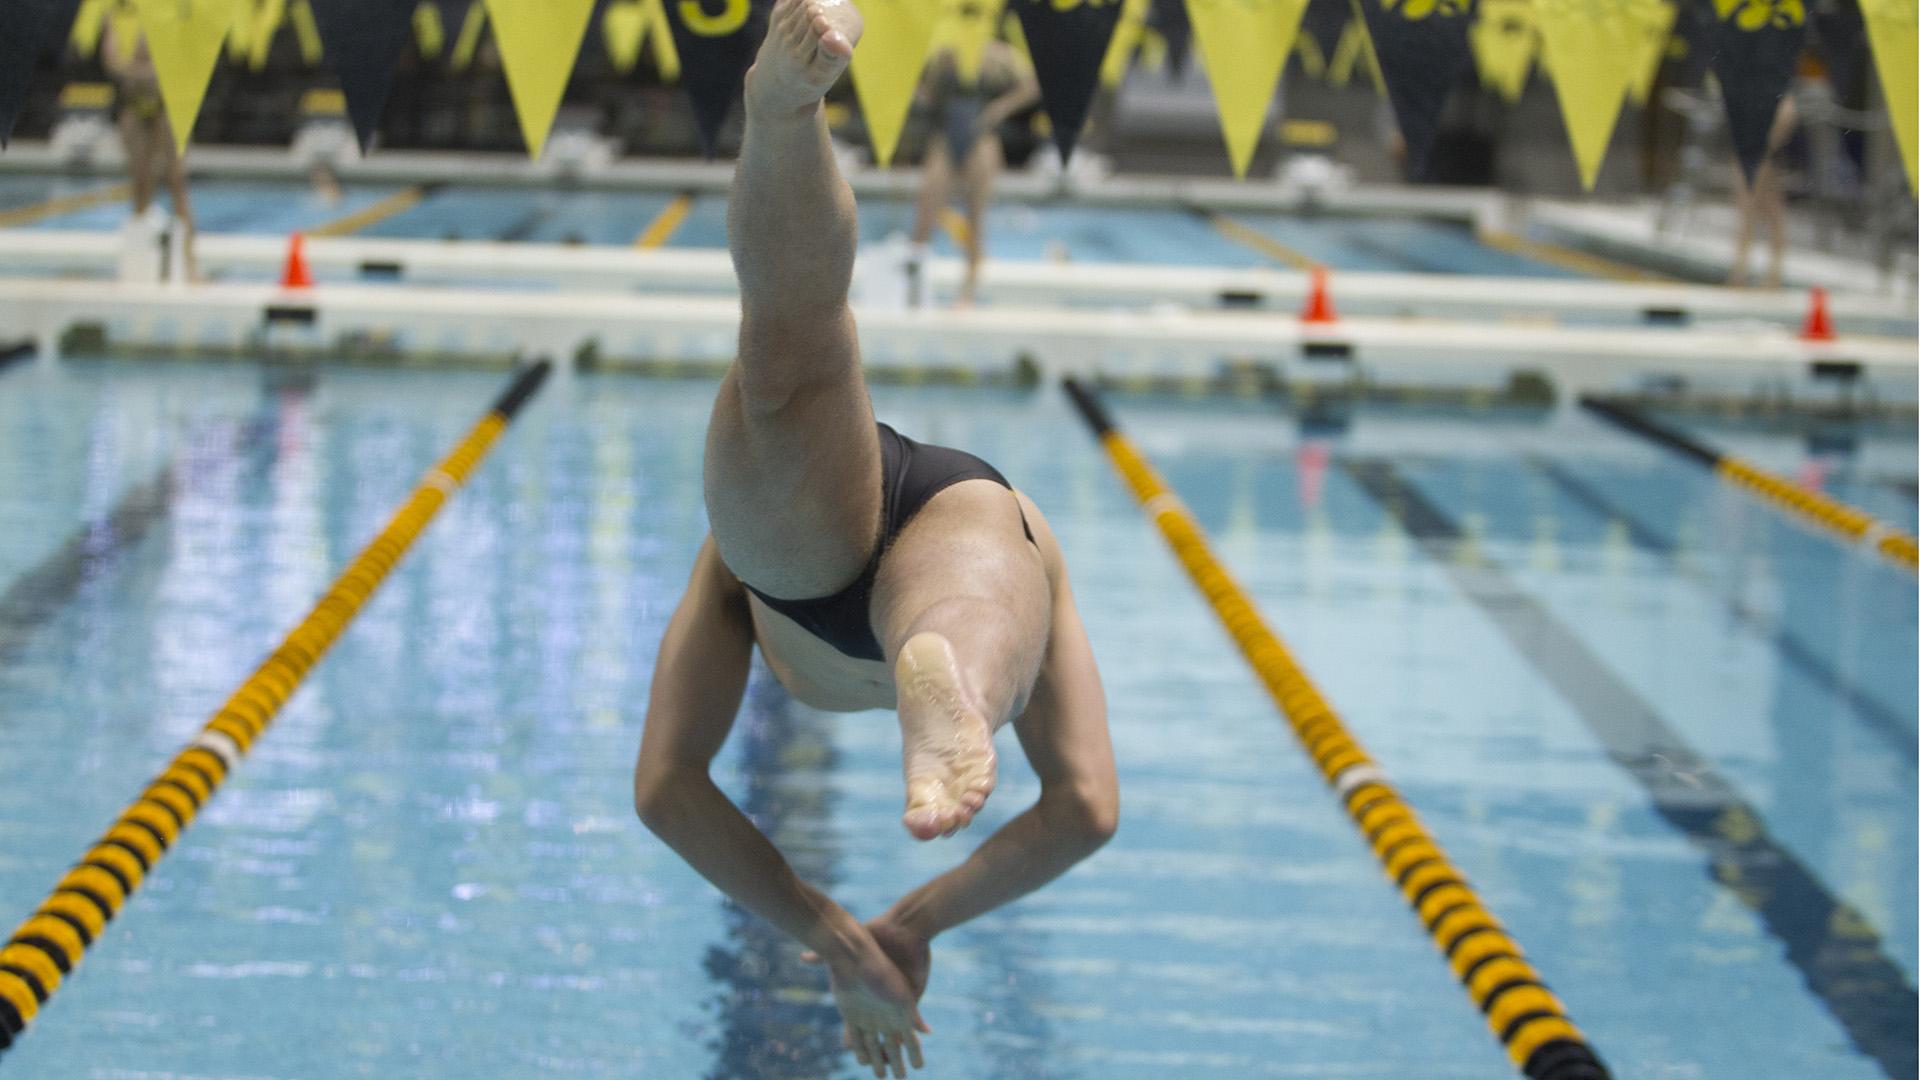 The University of Iowa mens' swimming fifth in Big Tens - The Daily Iowan